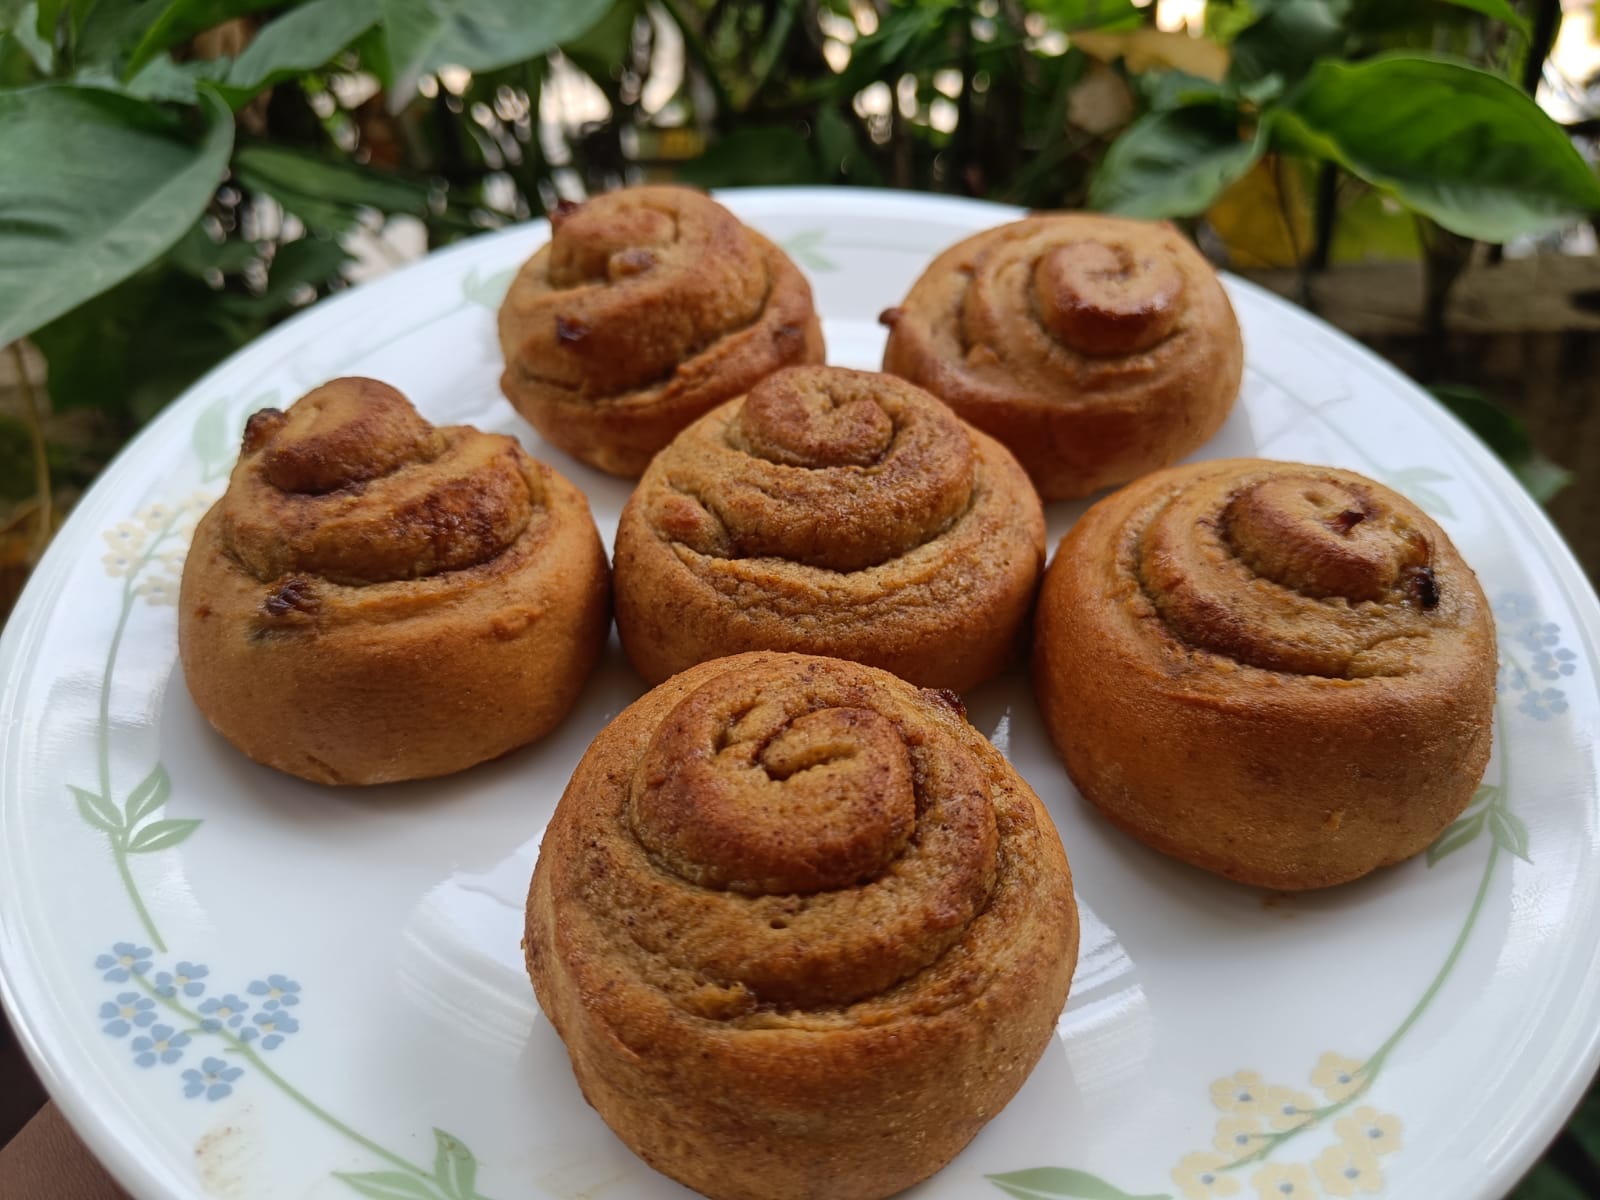 100% Whole Wheat Cinnamon Rolls | Refined Sugar-Free | Eggless | No Maida | No Preservatives | Fibre Rich | 50g x 3 Rolls (Available only in Bangalore)